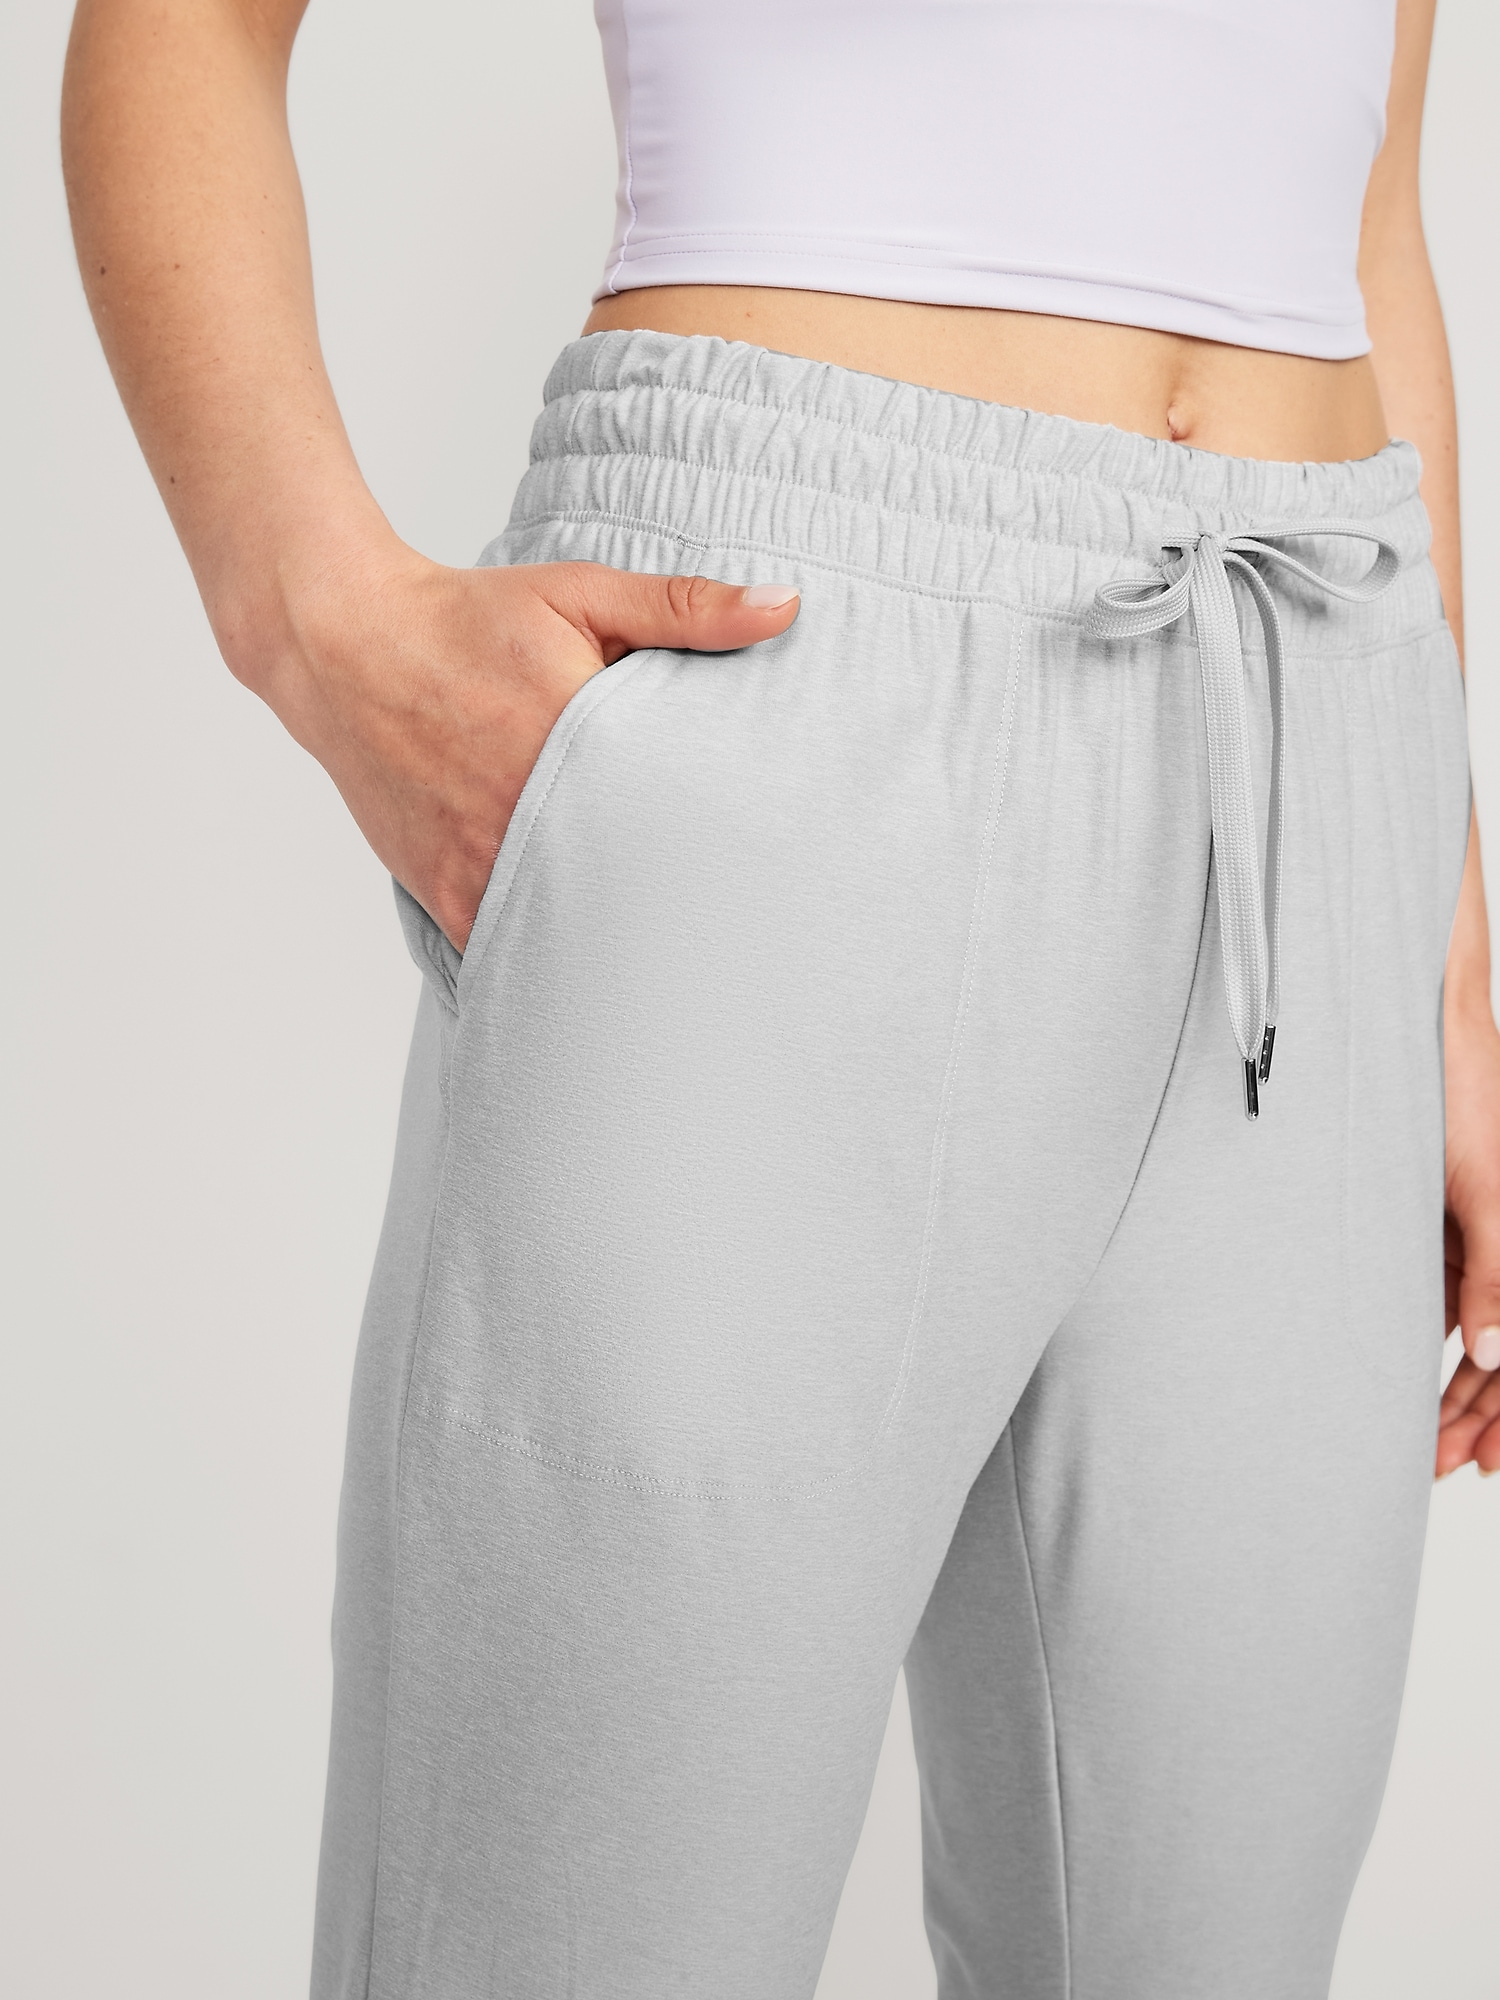 High-Waisted Cloud 94 Soft Ankle Jogger Pants | Old Navy